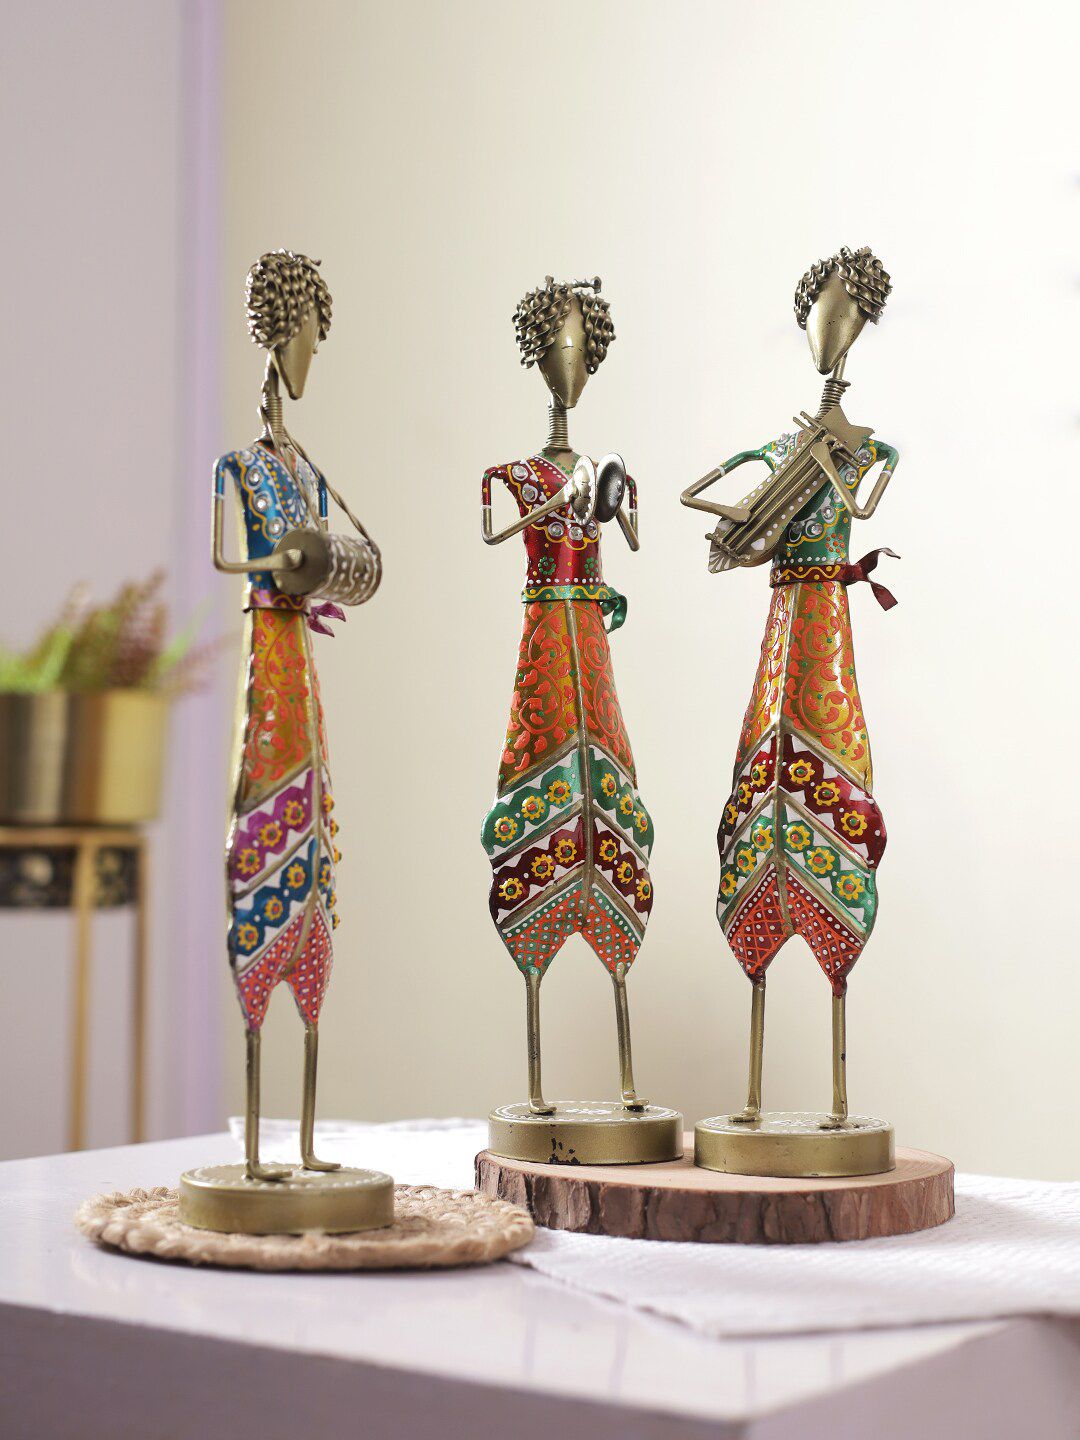 Aapno Rajasthan Set Of 3 Gold-Toned & Orange Solid Traditional Colorful Musical Showpiece Price in India